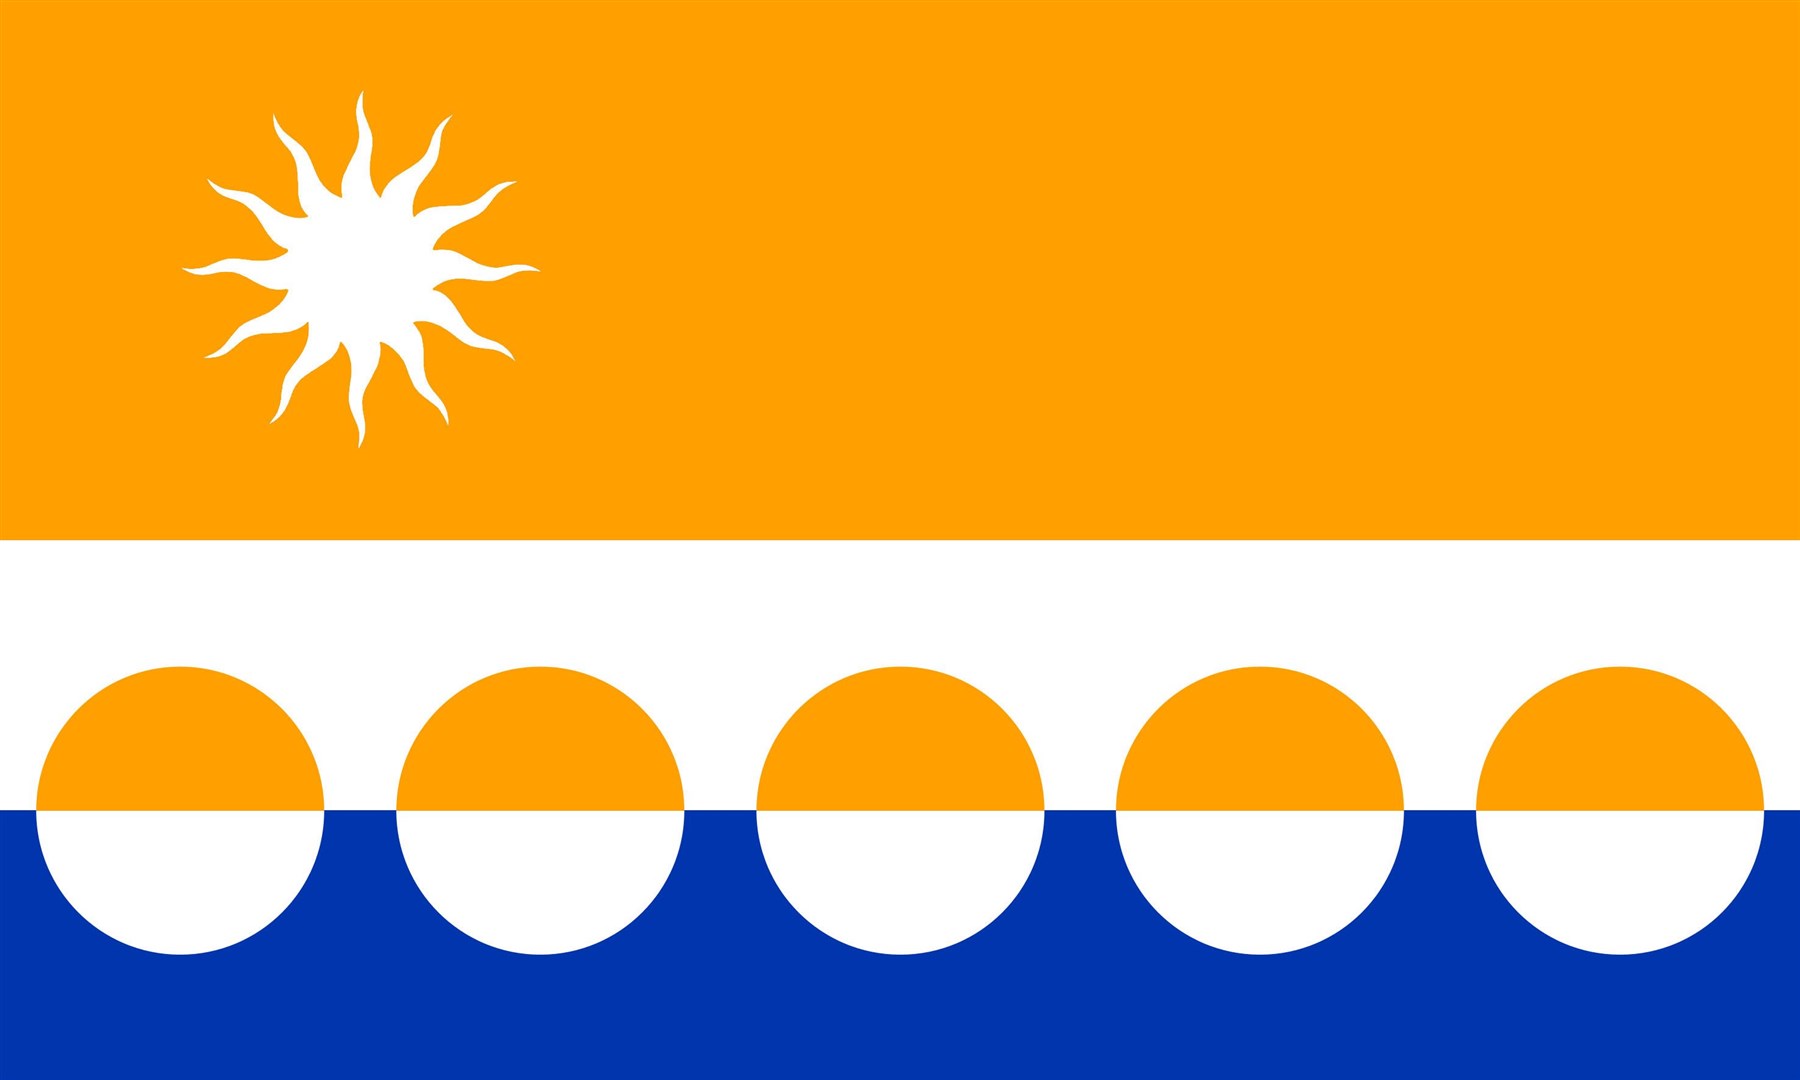 The white horizontal band recalls the bridges that are emblematic of the county. The blue colour can represent both the rivers and the sea, while the golden-orange below the bridge represents the whisky made from the county’s waters and above the bridge the sun symbolises the natural sunsets and agriculture.